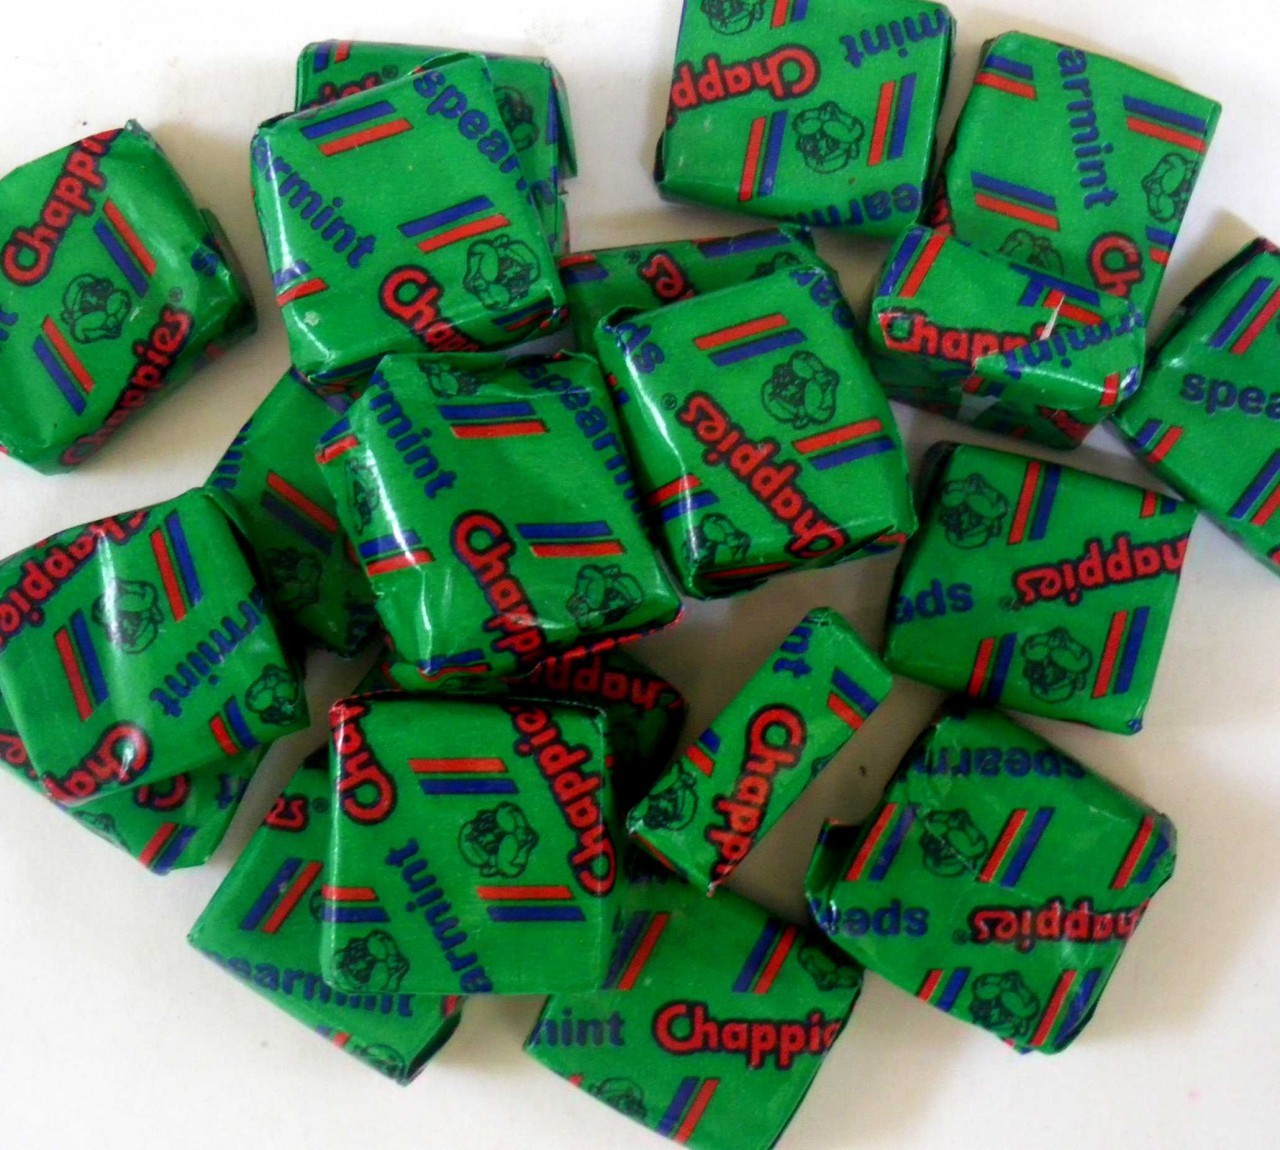 Candy - Chappies Individual - Spearmint